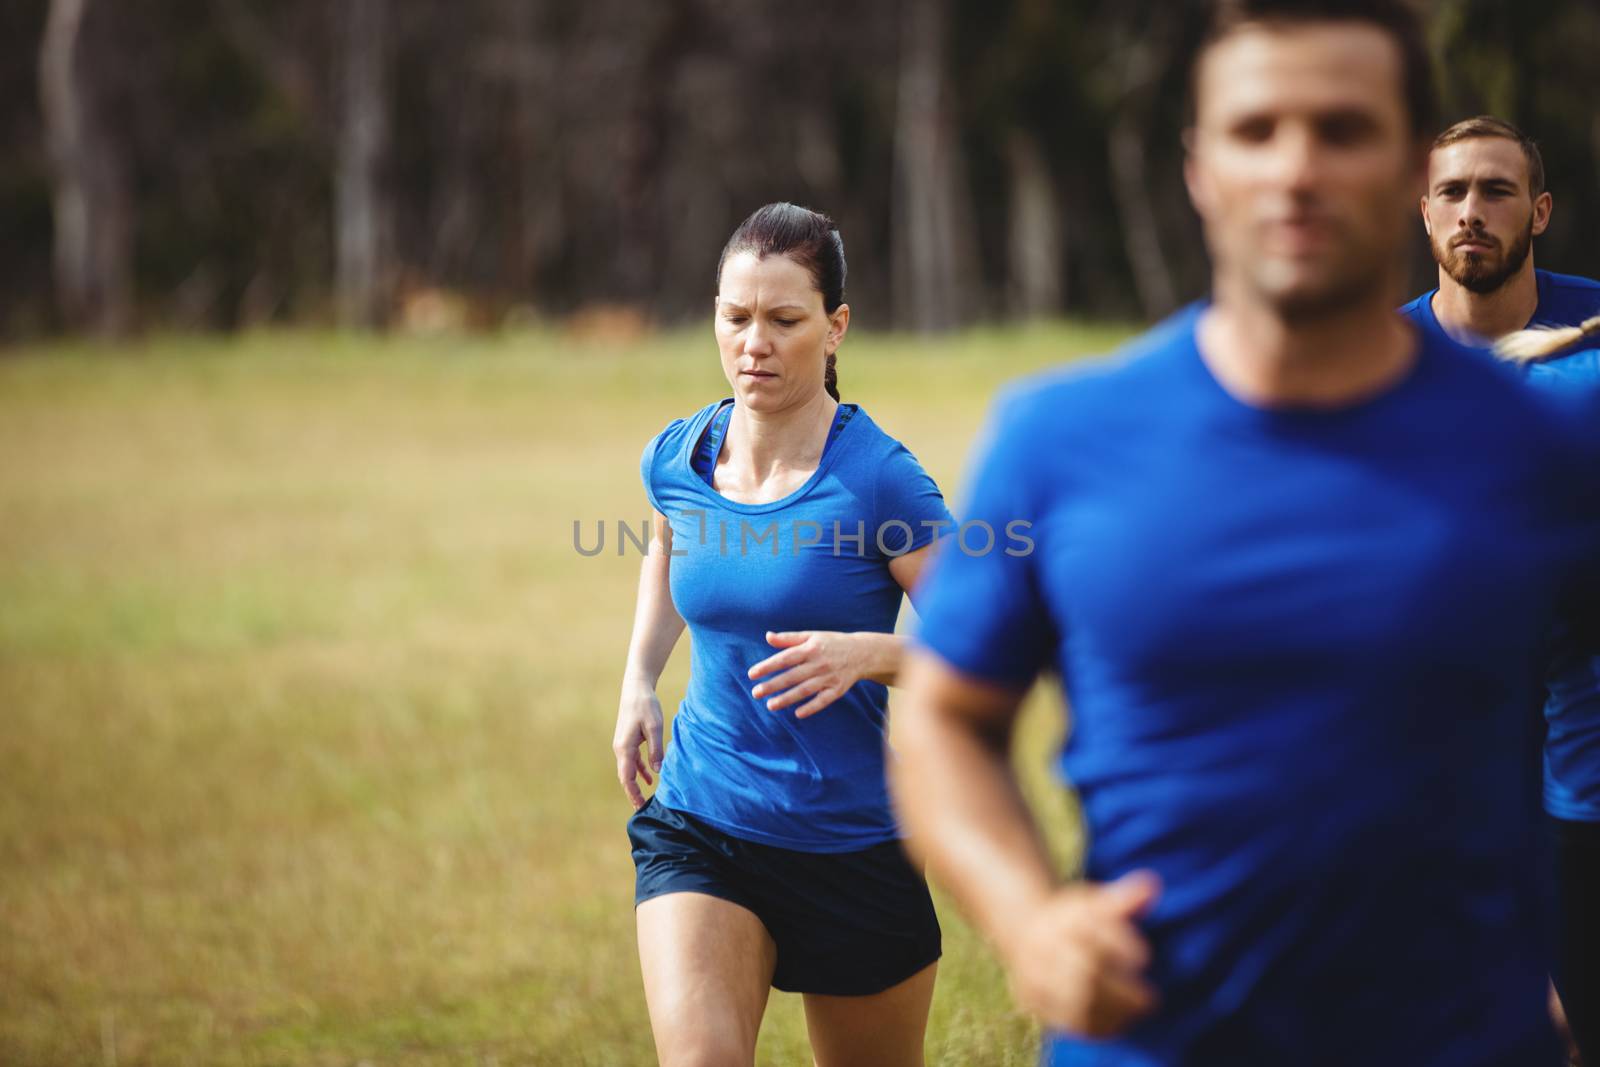 Fit people running in boot camp